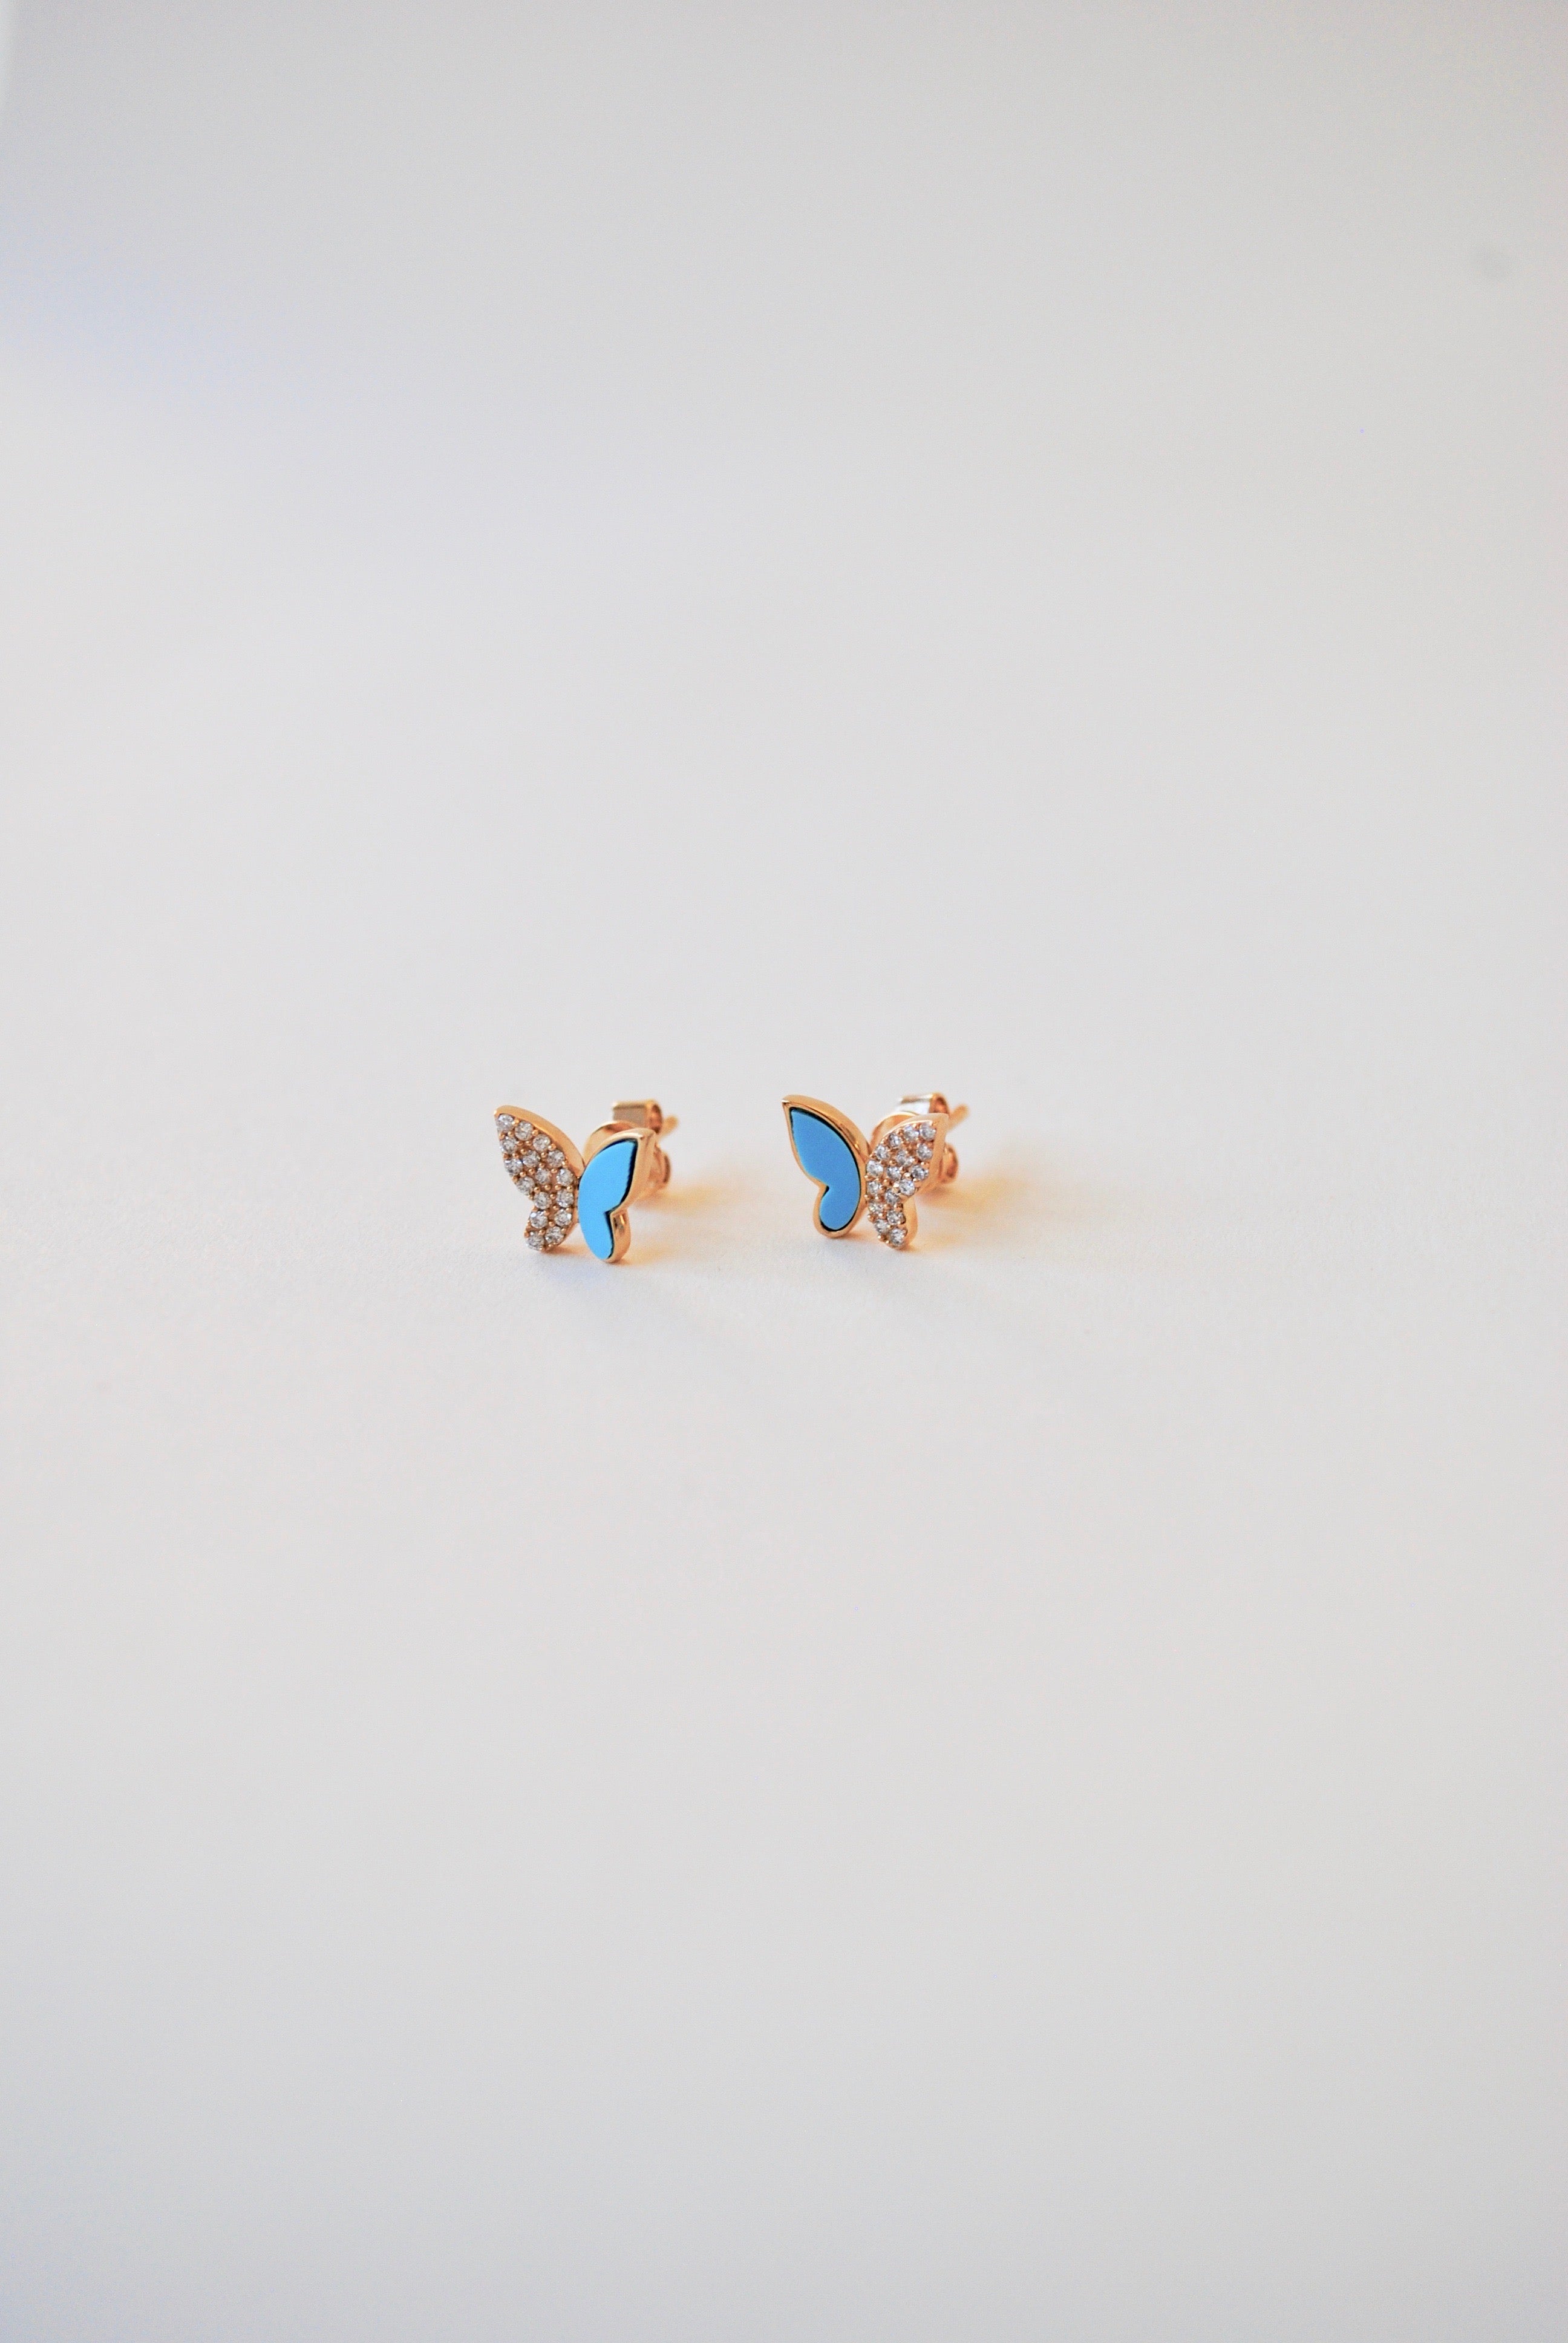 14K Gold and Diamond Turquoise Butterfly Earrings